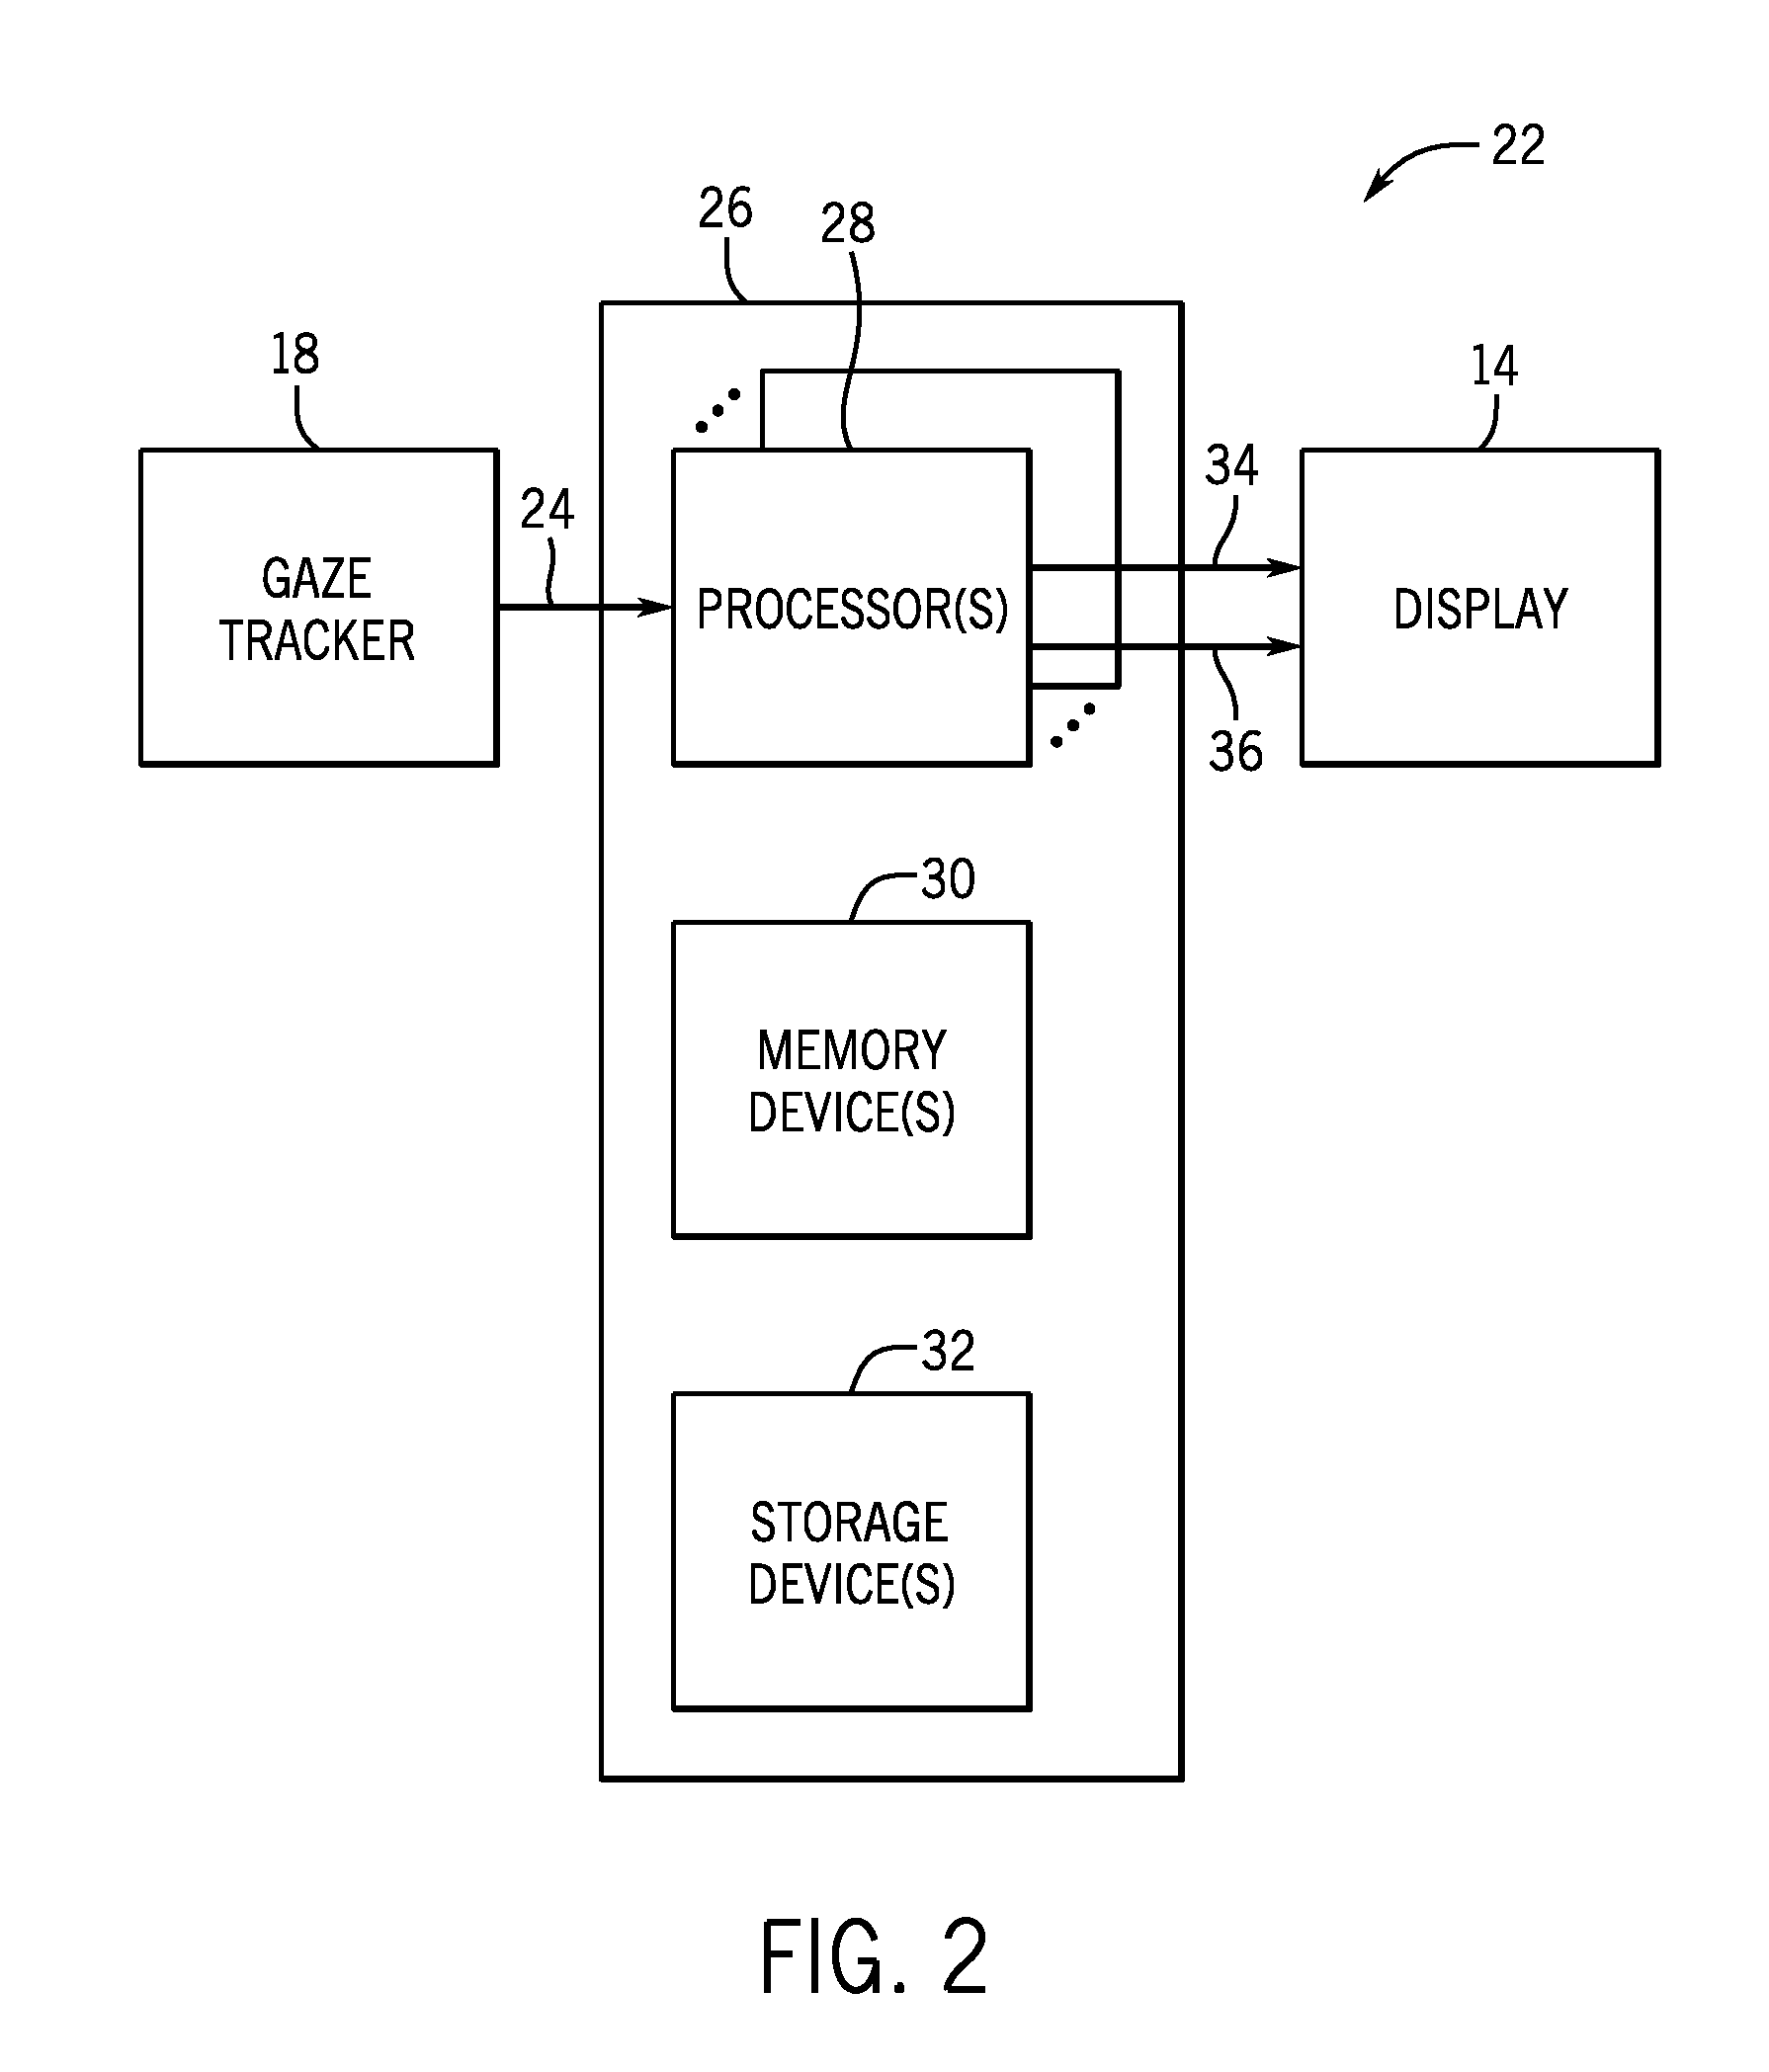 Systems and methods for displaying three-dimensional images on a vehicle instrument console